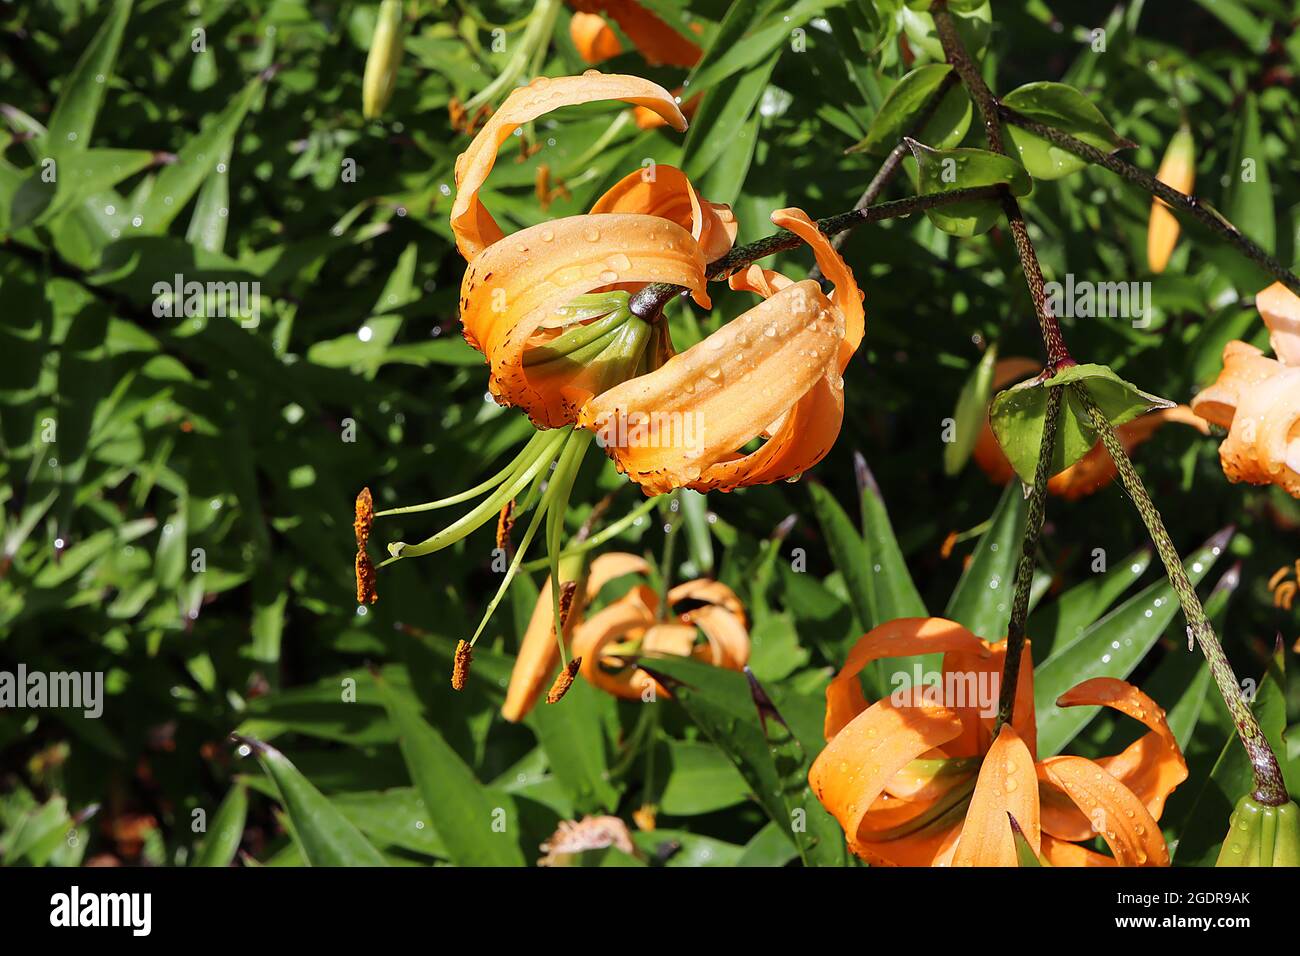 Lilium pumilum Asiatic lily – scented orange flowers with brown spots and fully recurved petals,  July, England, UK Stock Photo